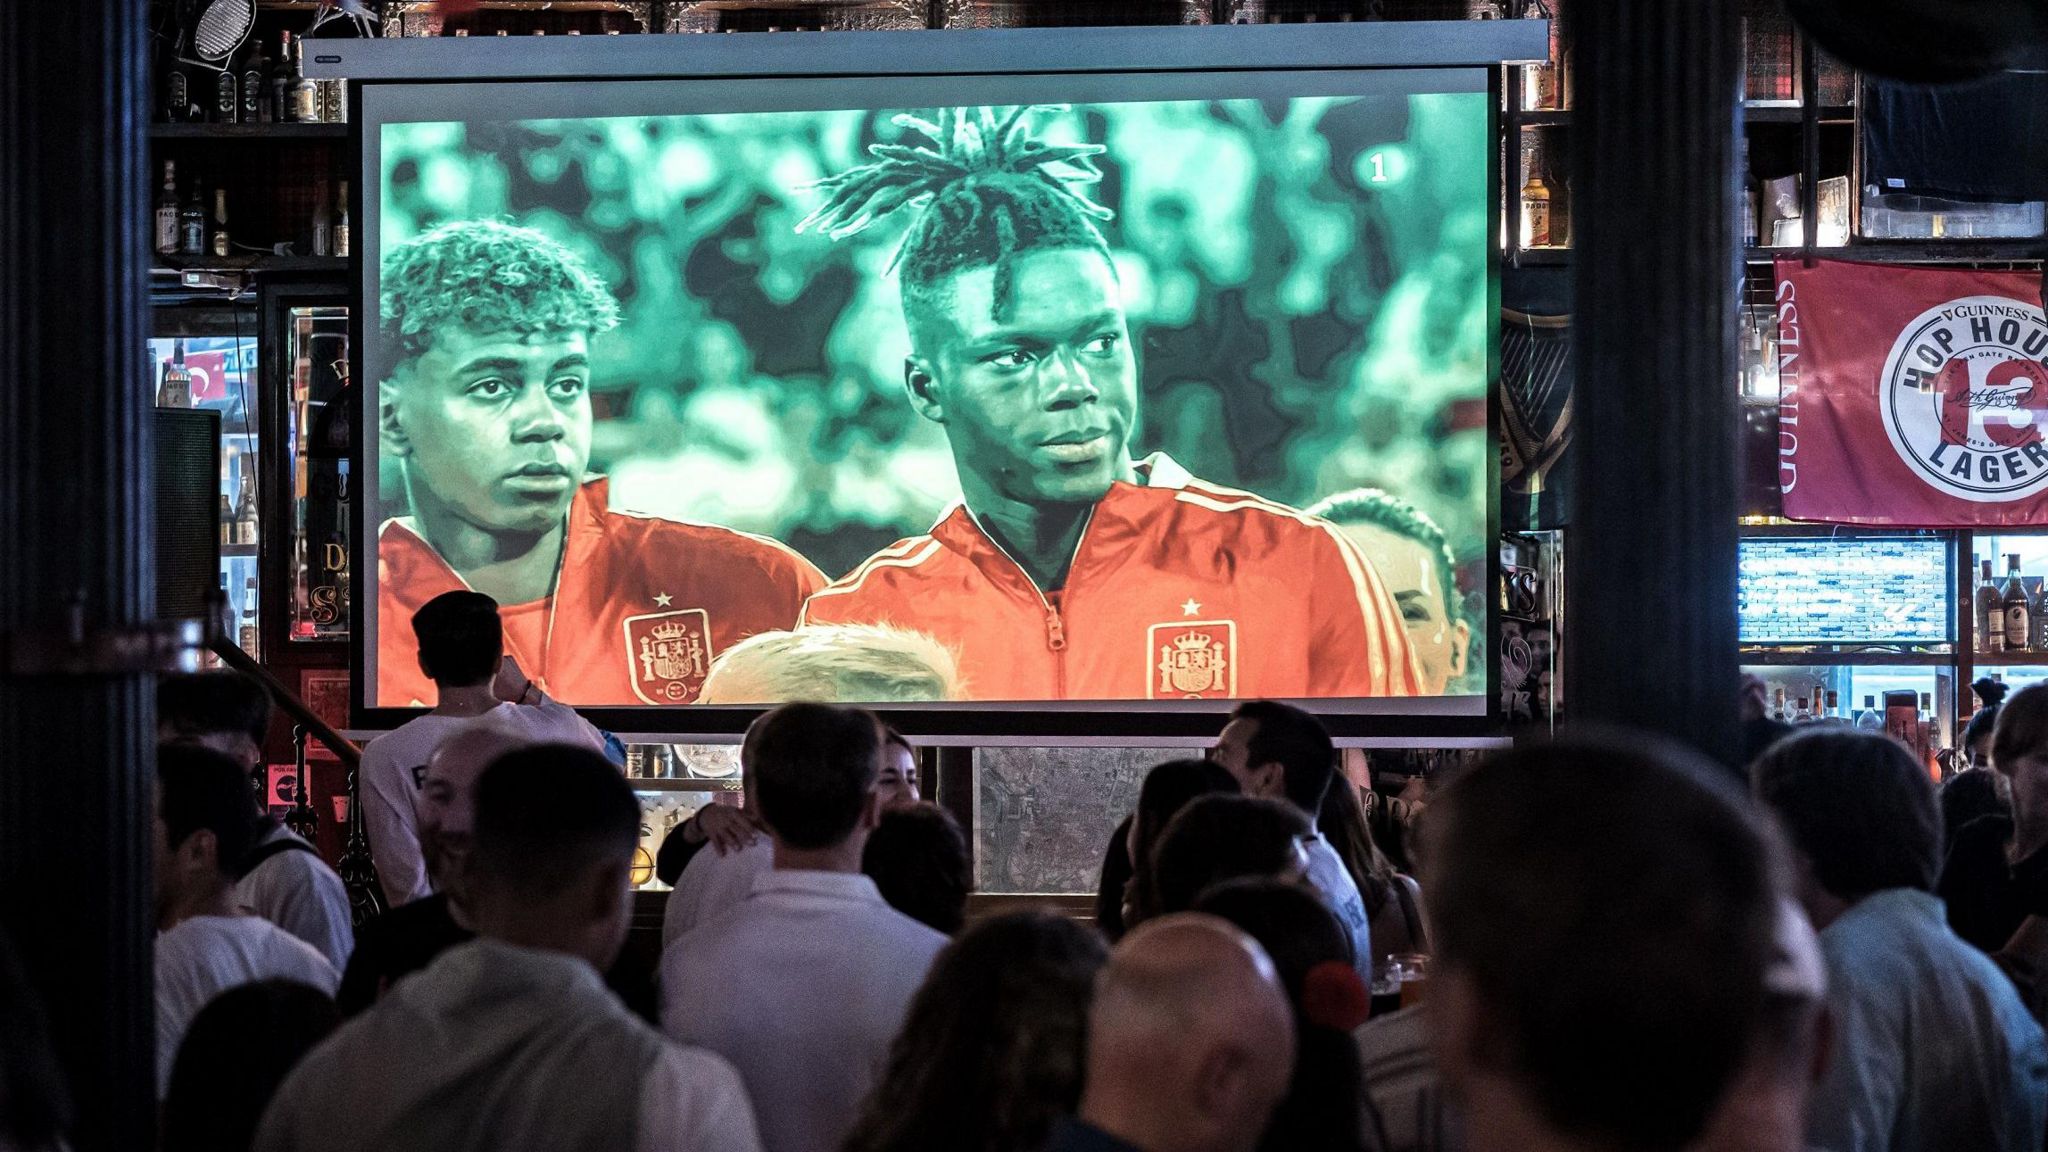 People watching a Euro football match on a TV screen